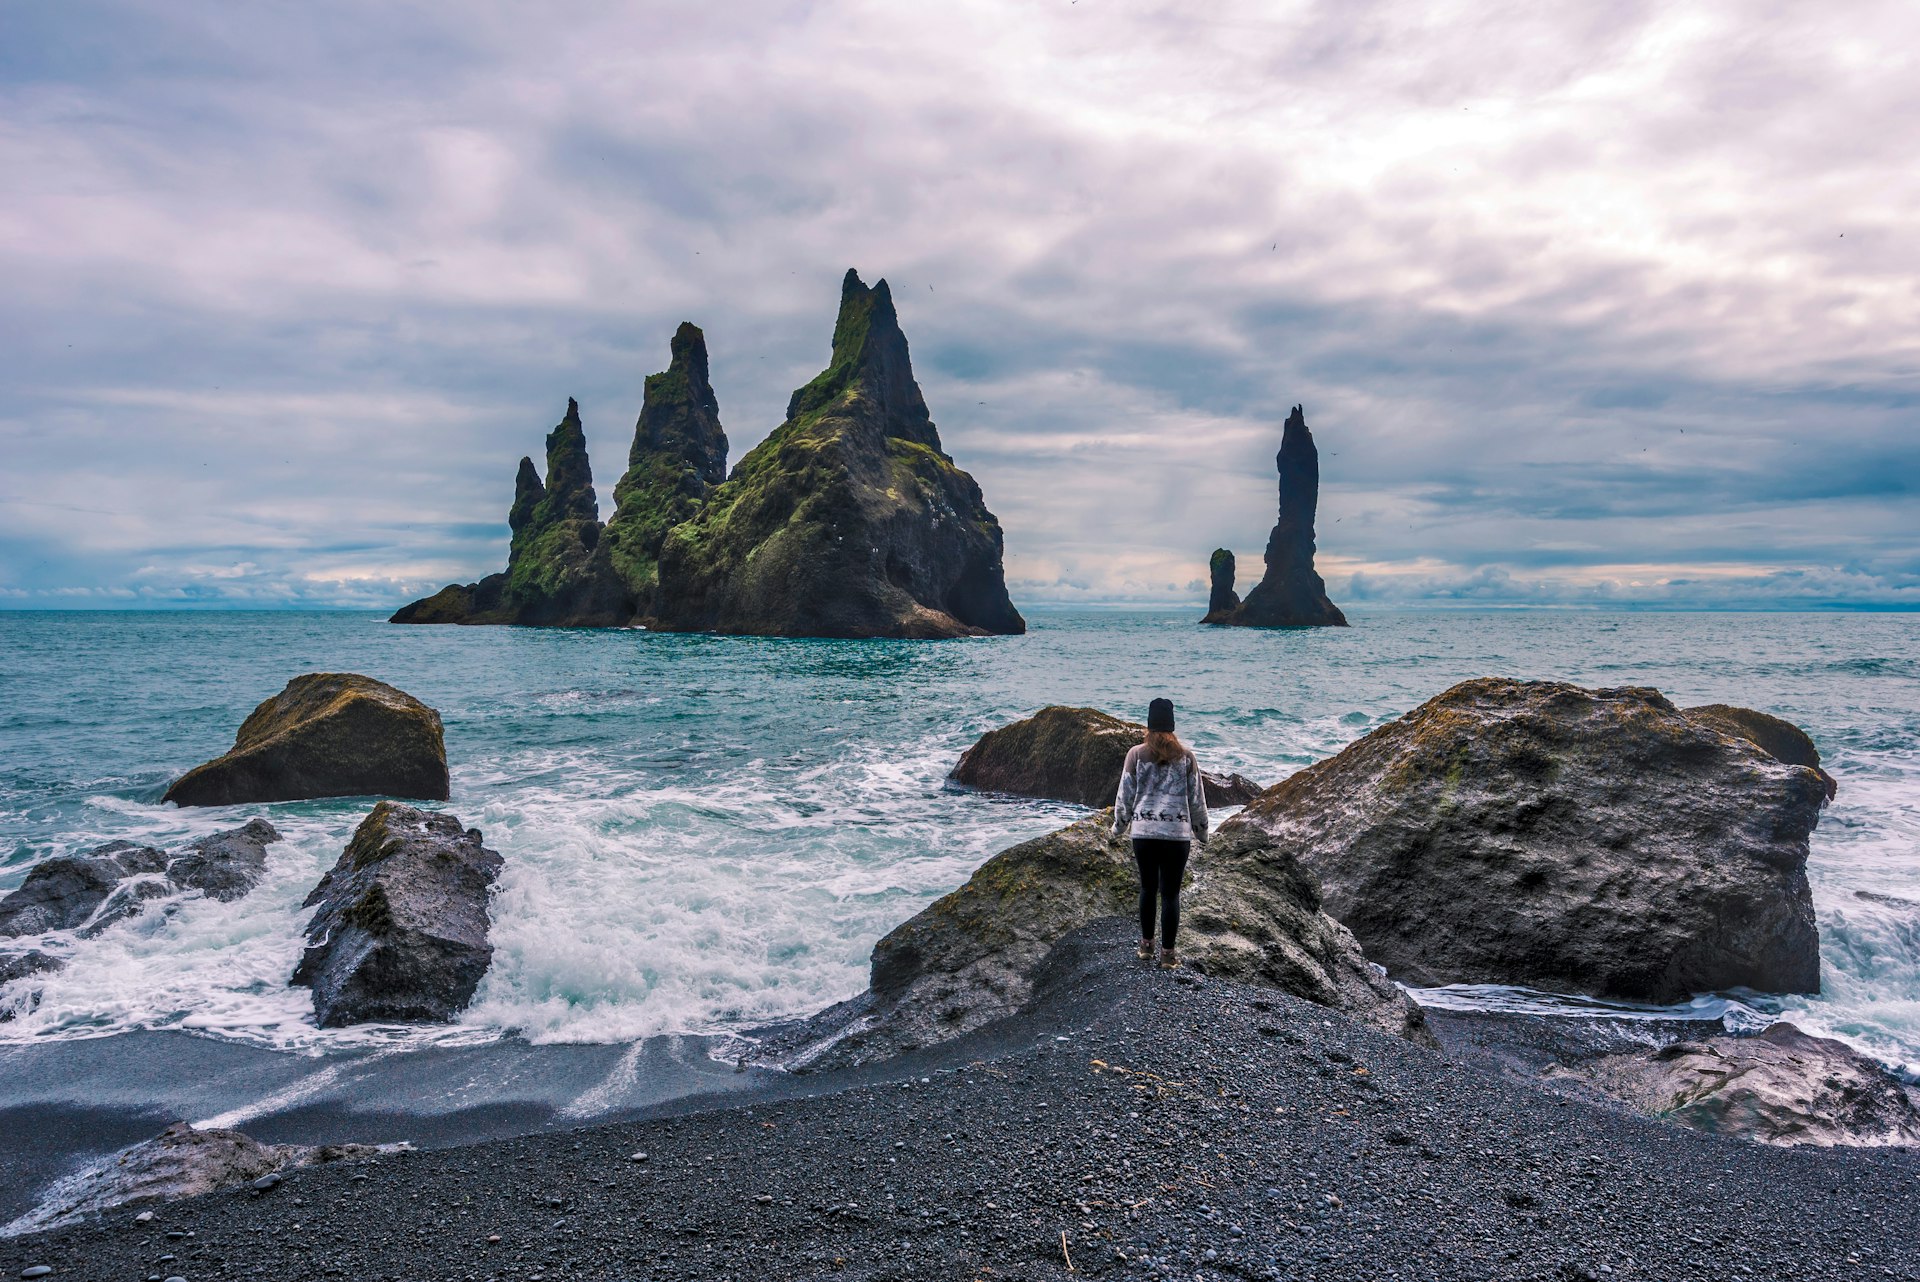 A girl approaches the rocky shore and basalt sea stacks at Reynisfjara beach.